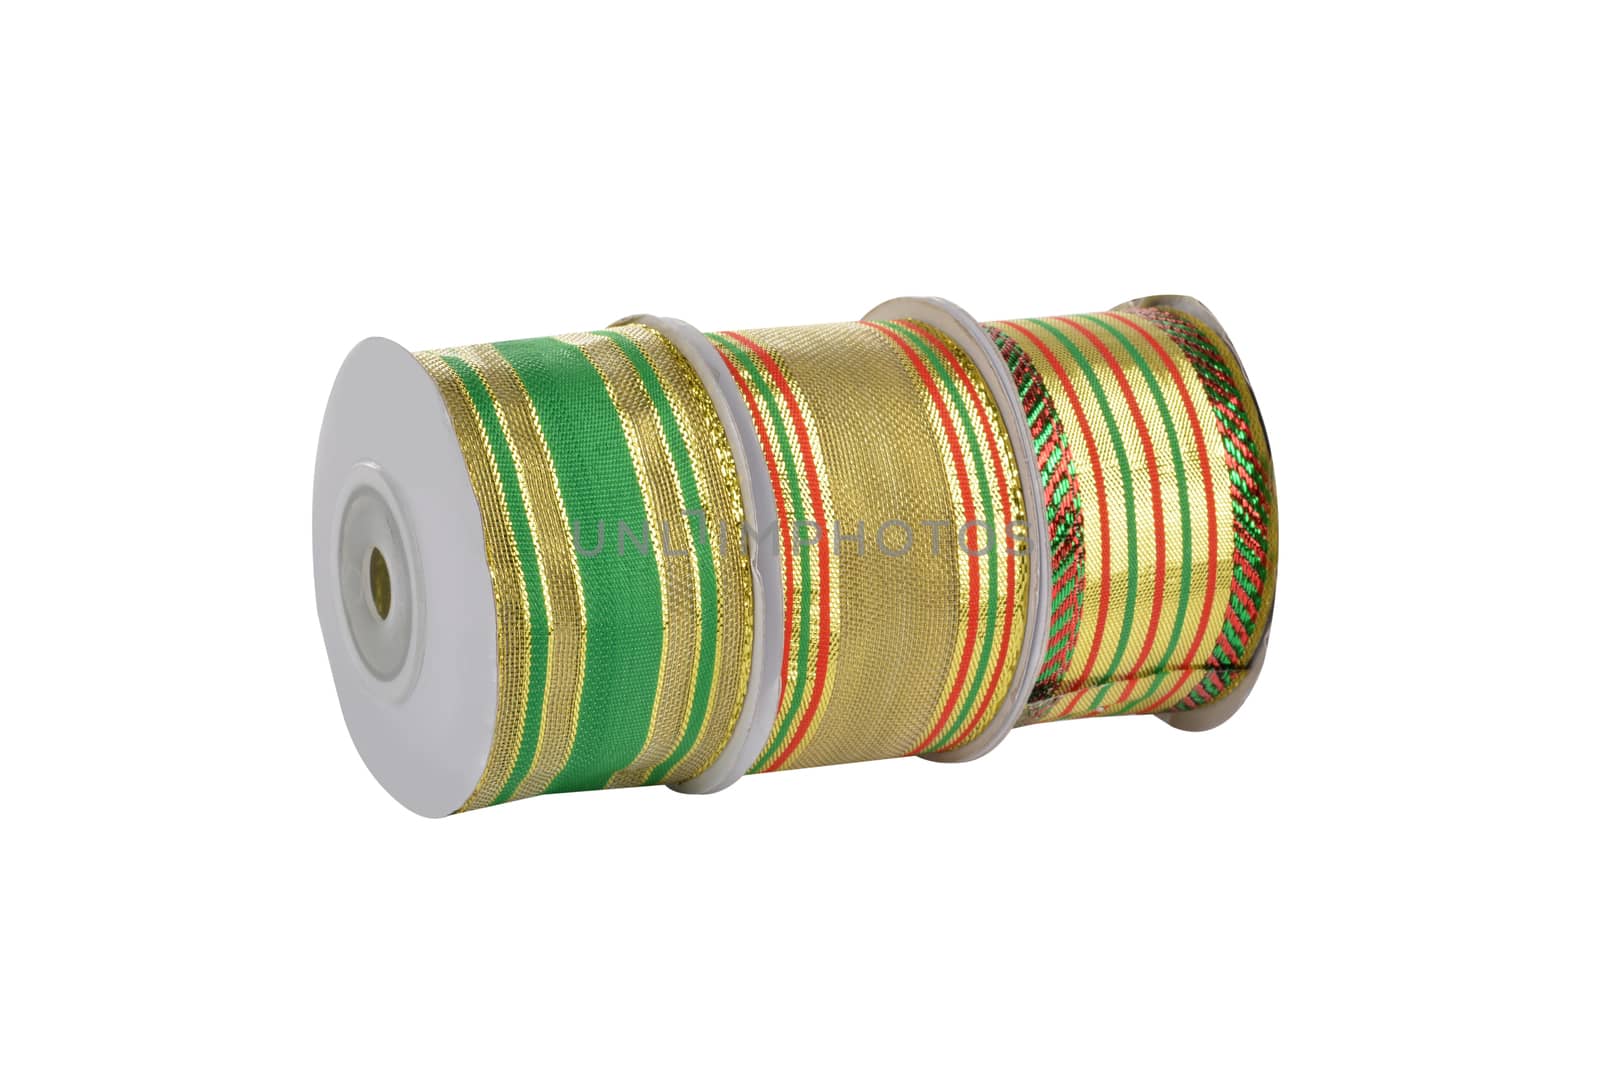 damaged packaging of set Reel with shiny organza tape ribbon festive Gold and silver isolated on white background. Use for sewing and gift wrapping.